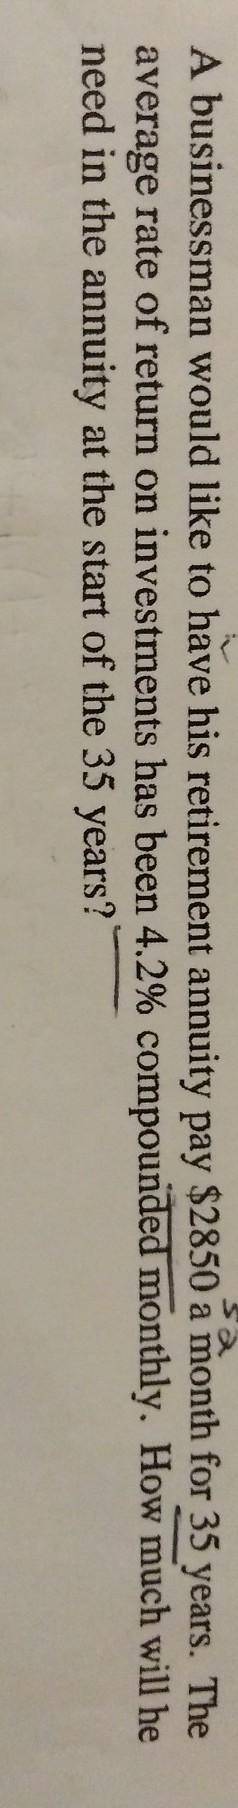 Plsss help Is this a present value question or a future value question?